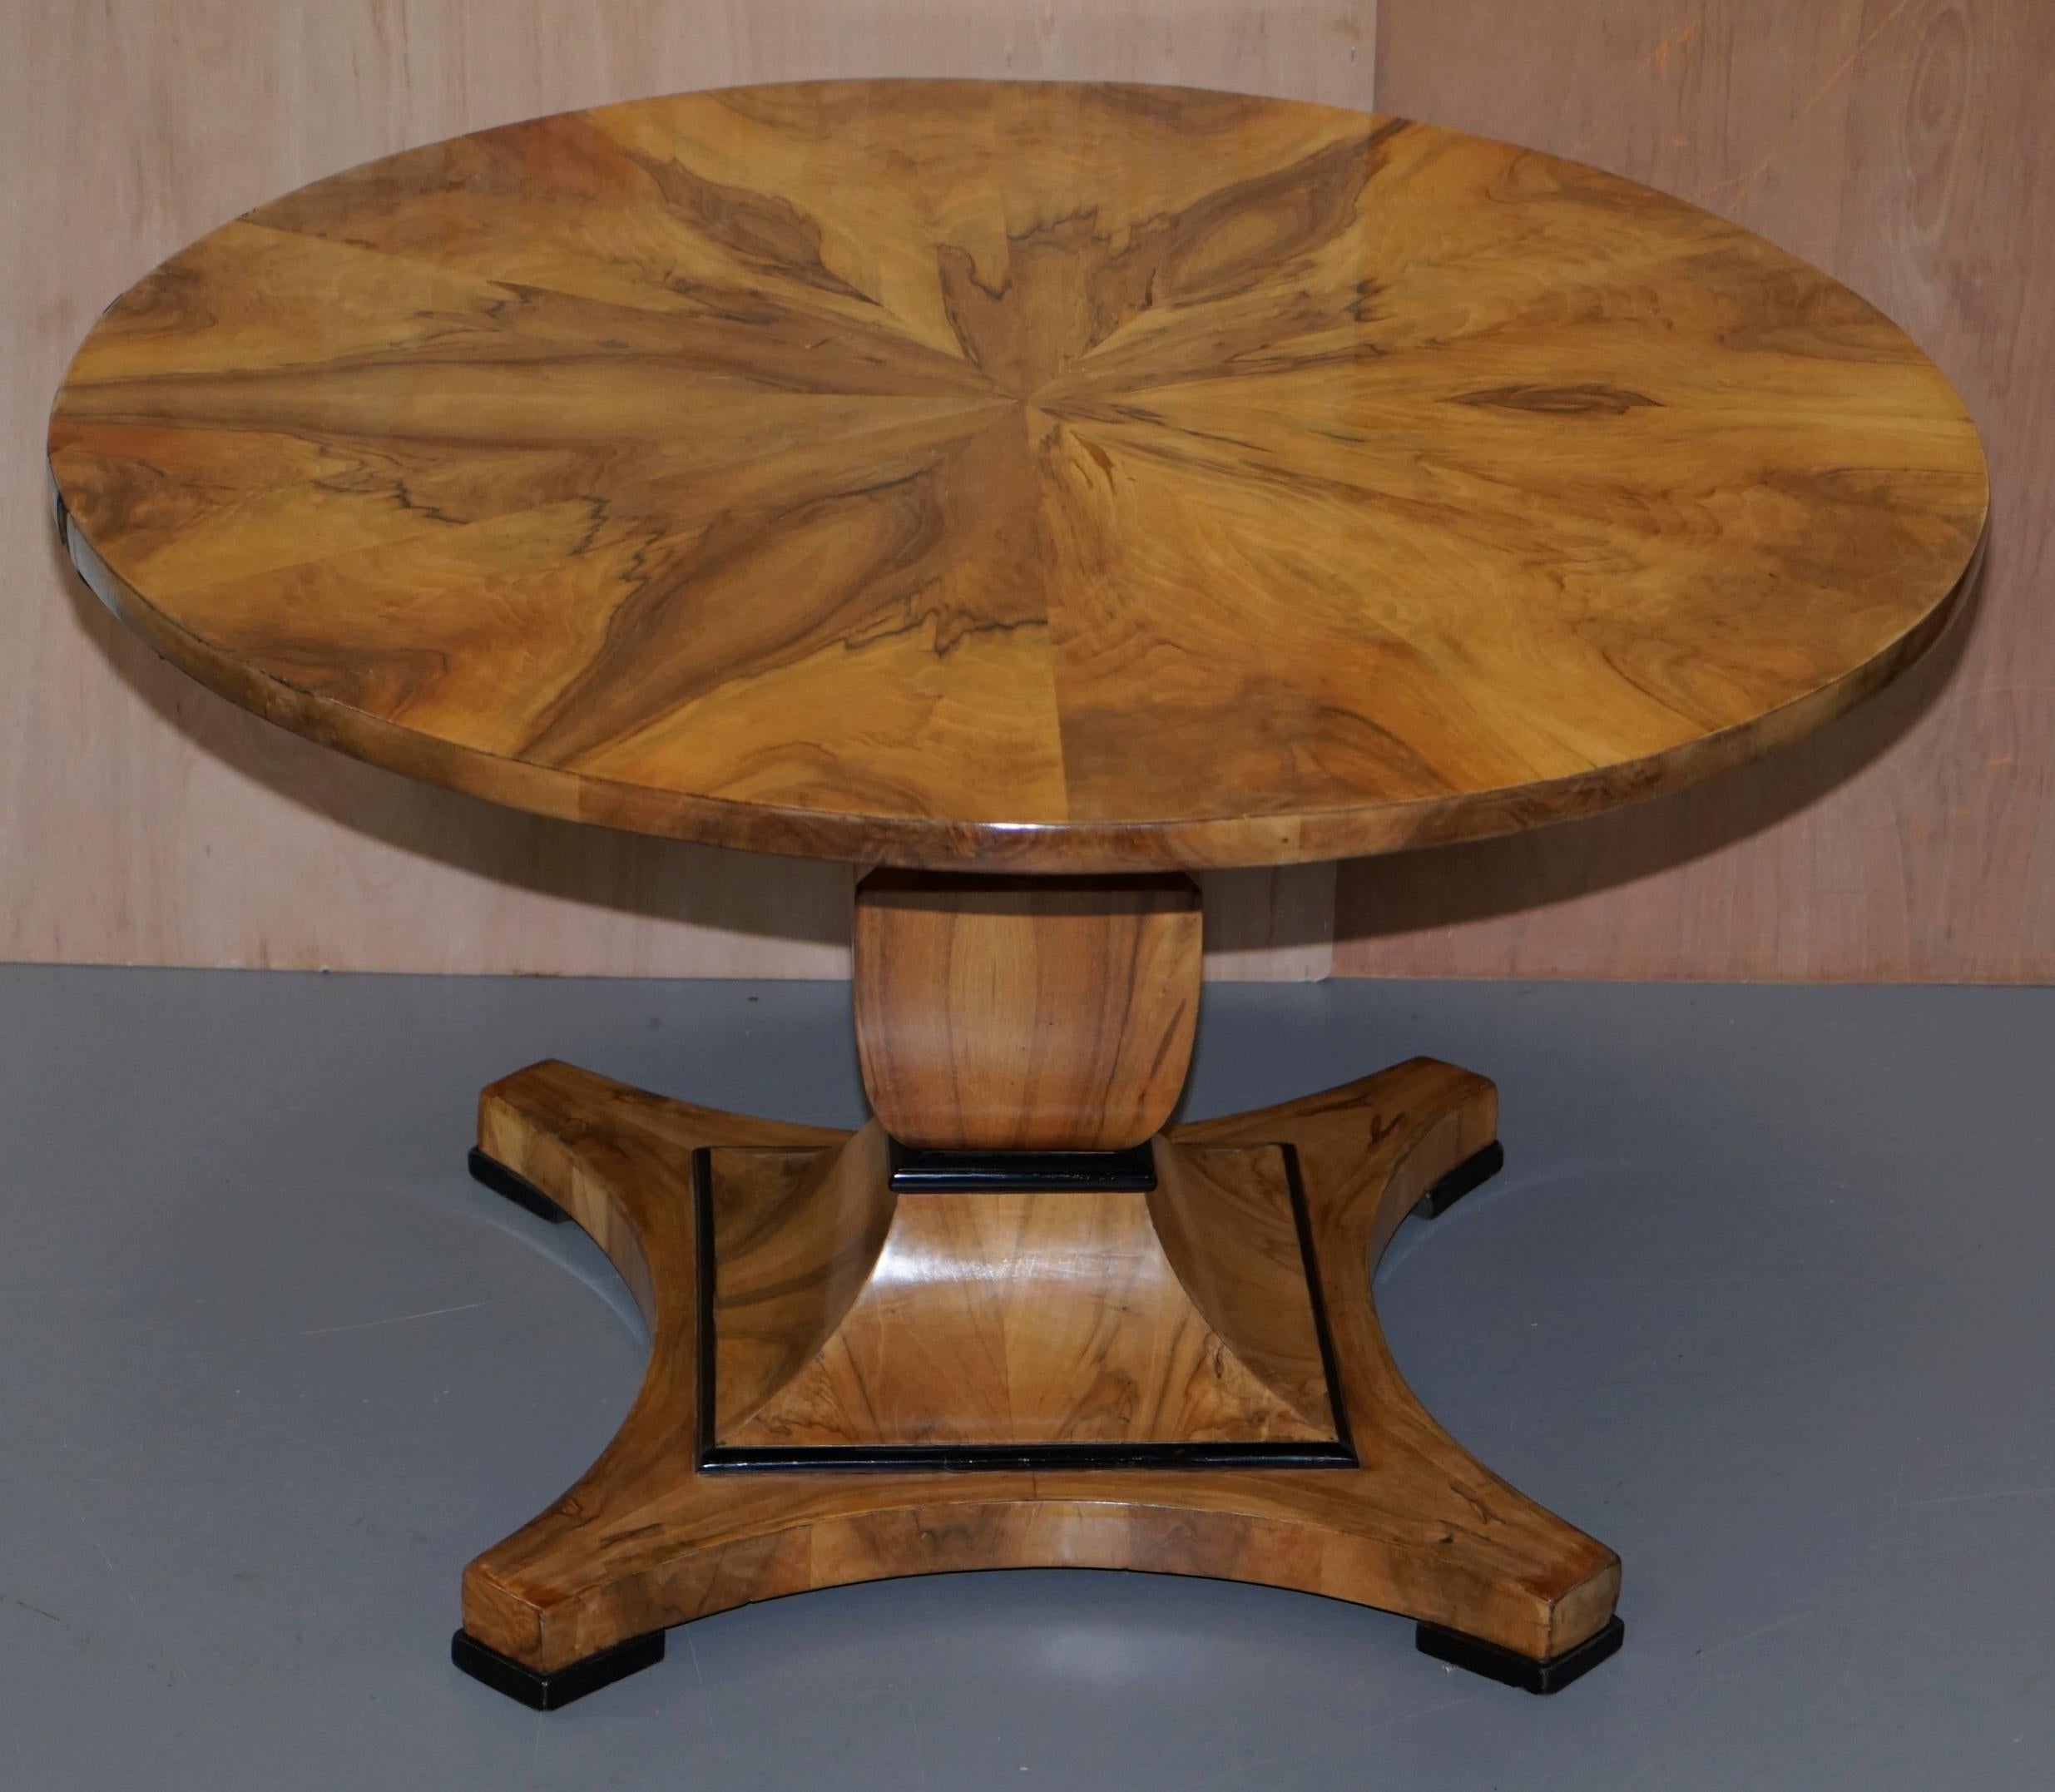 We are delighted to offer for sale this stunning large Biedermeier south German round table circa 1825

A highly collectible and good looking table, the best part of 200 years old and the timber patina is simply glorious. Its quarter cut walnut,